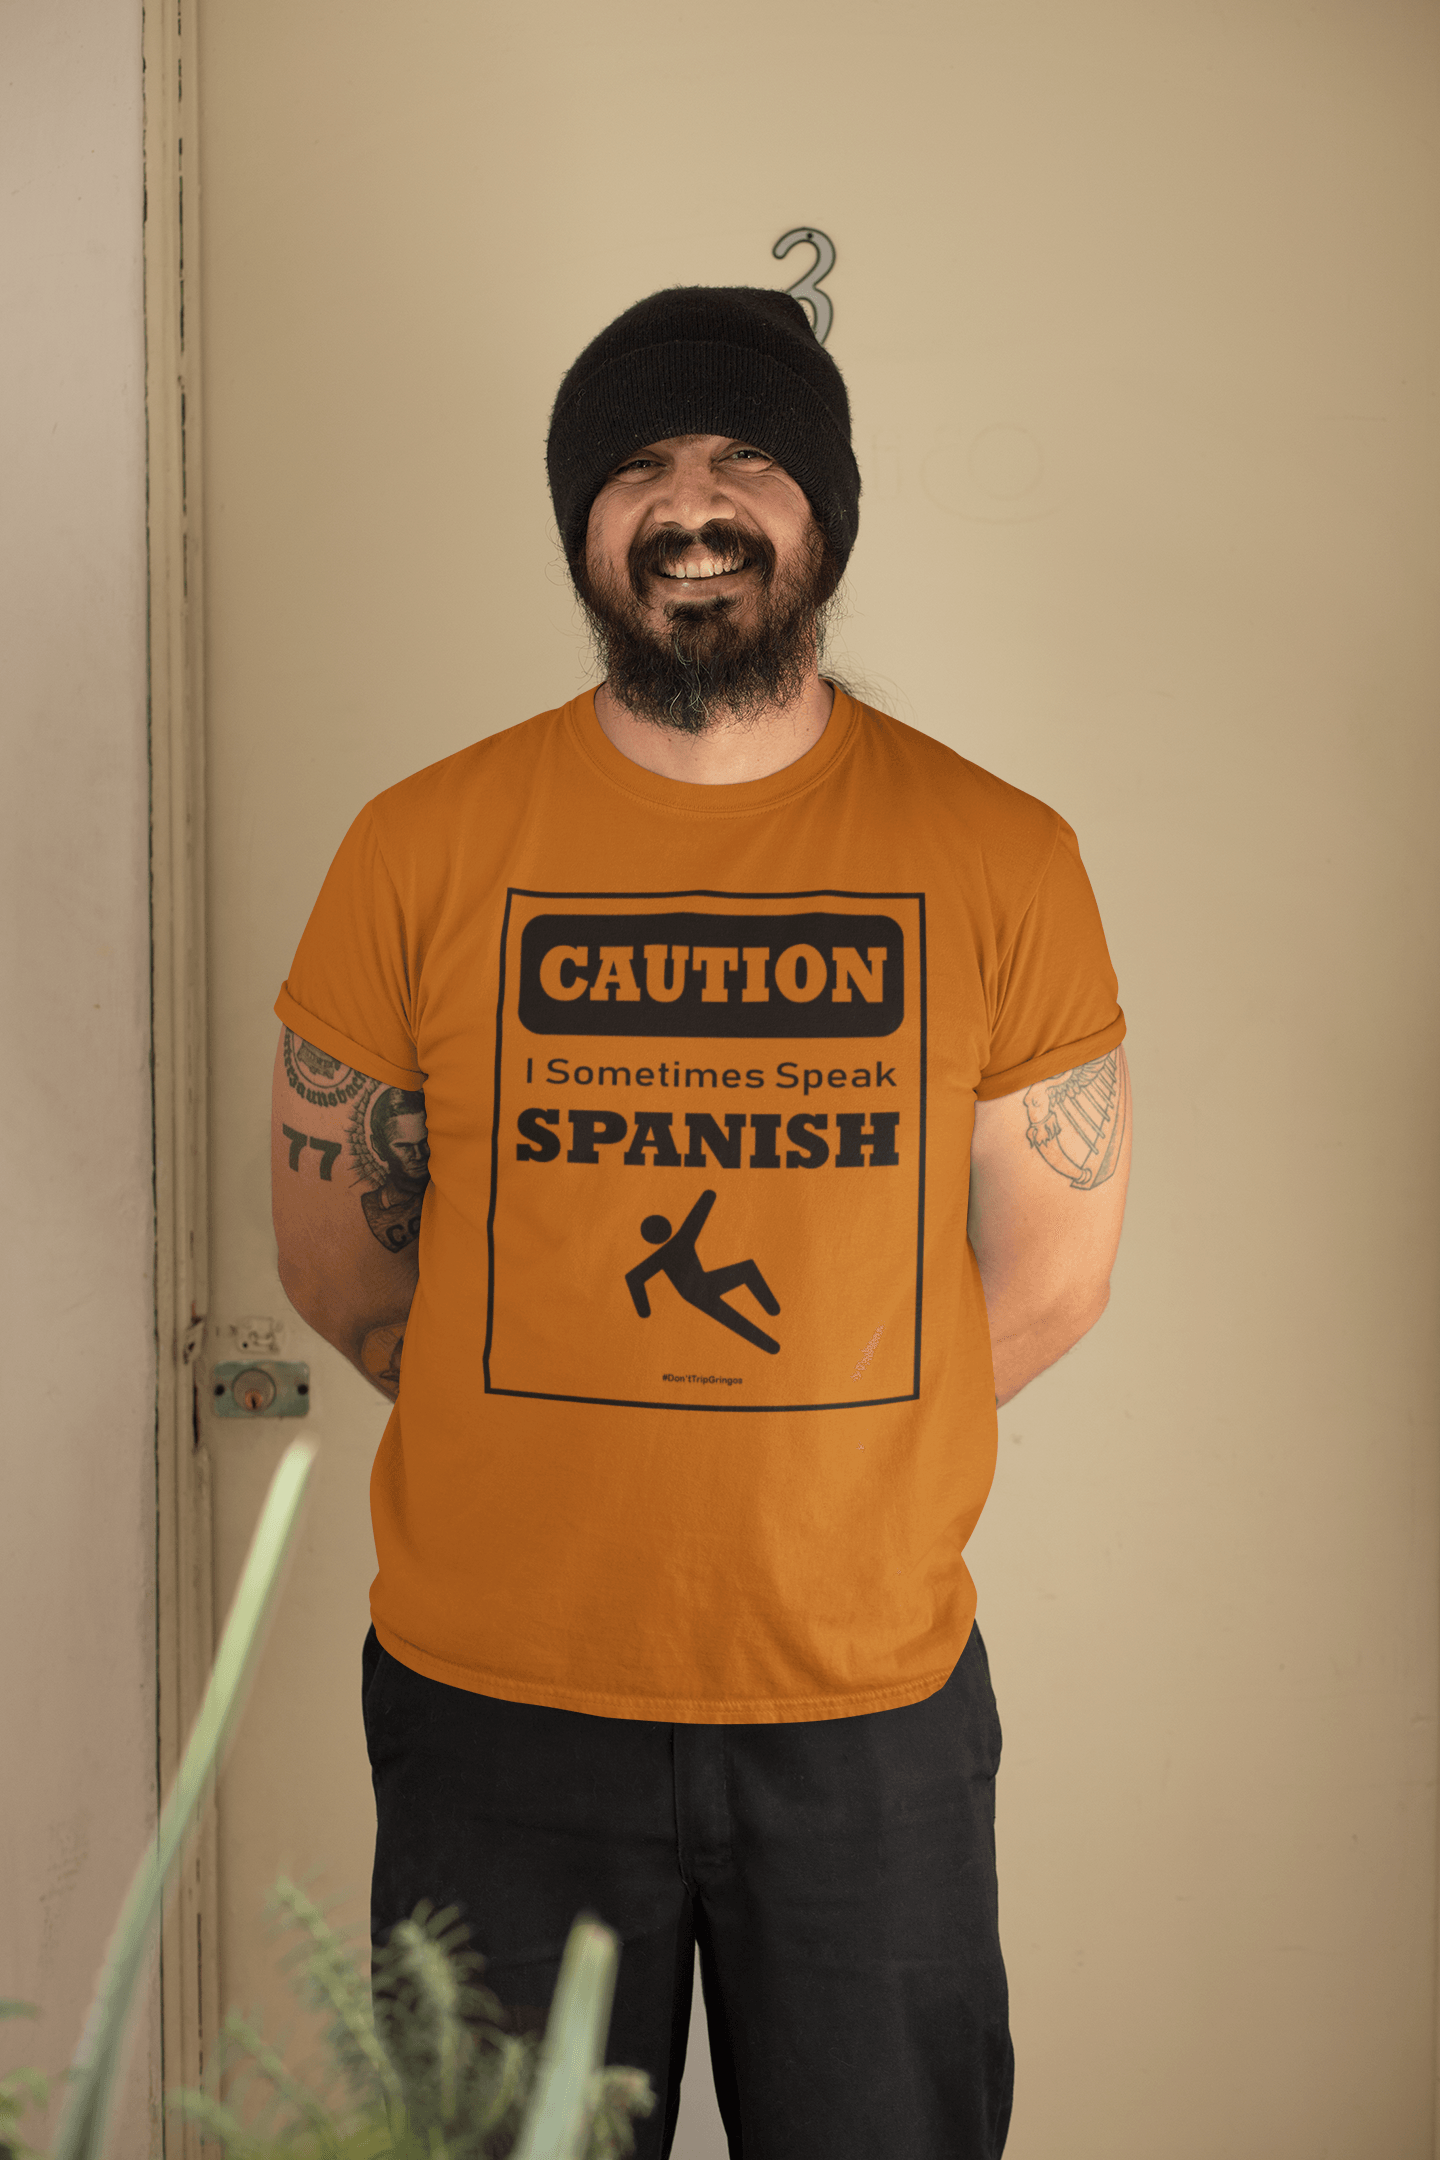 Texas orange t-shirt with black text and design that reads, "Caution I sometimes speak Spanish #Don'tTripGringos " in a caution sign layout. It is available in sizes SM-4XL at www.sanchezhere.com